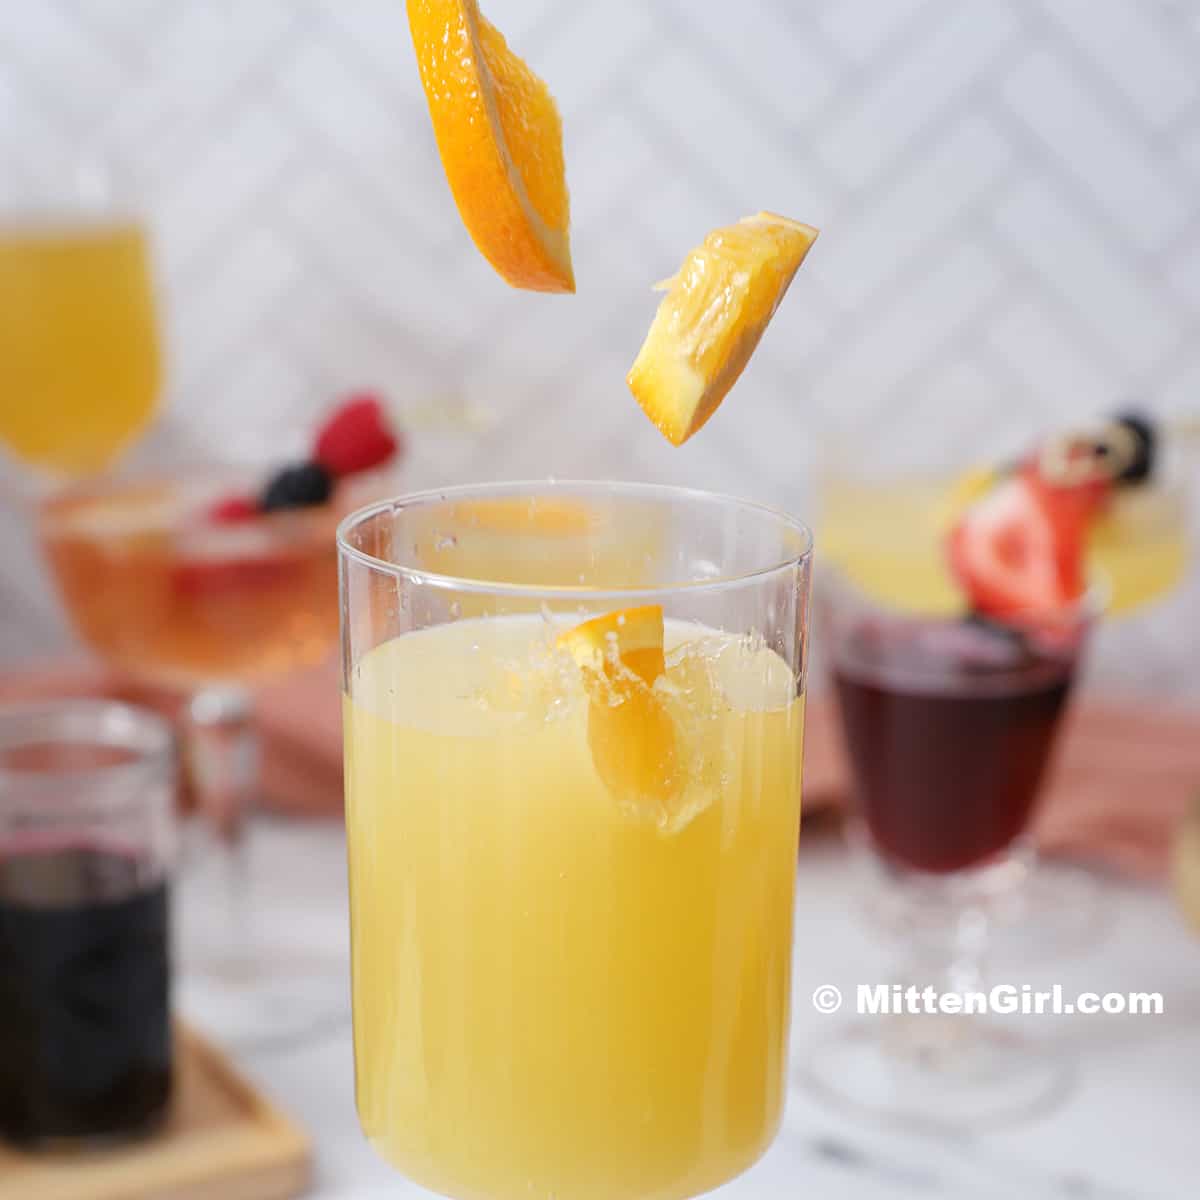 Orange slices falling into a glass of mimosa.